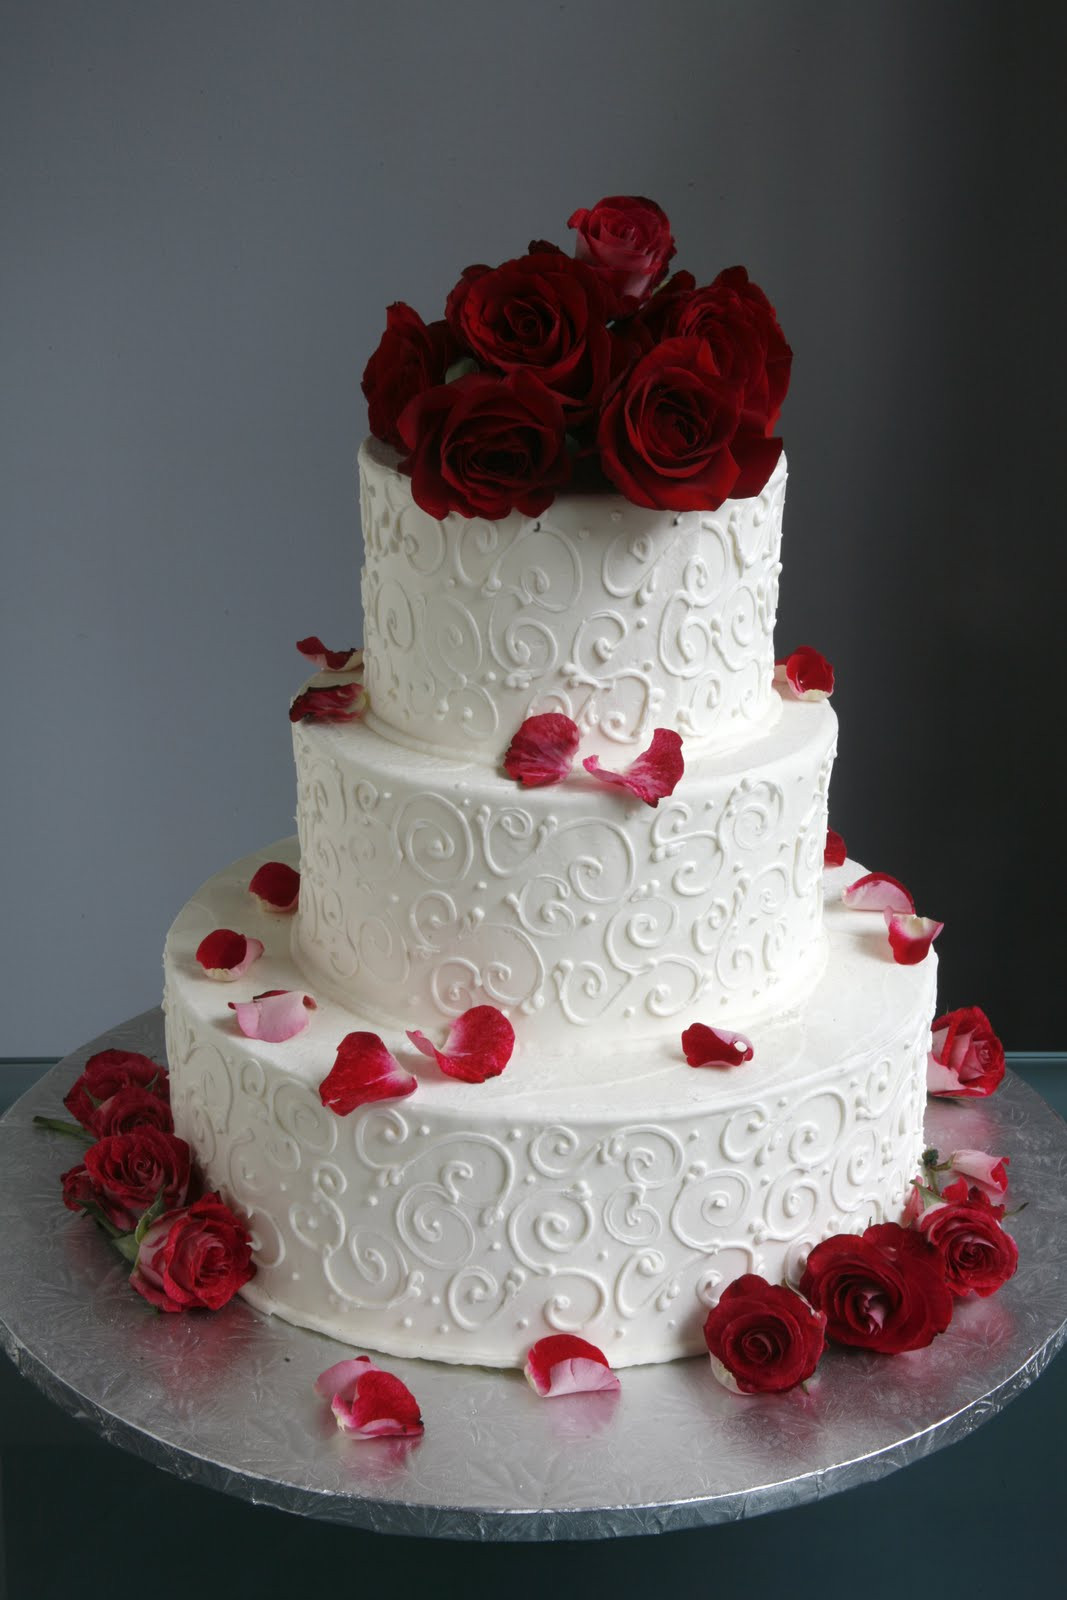 Wedding Cakes With Flowers
 A Simple Cake Wedding Cake with Fresh Flowers From